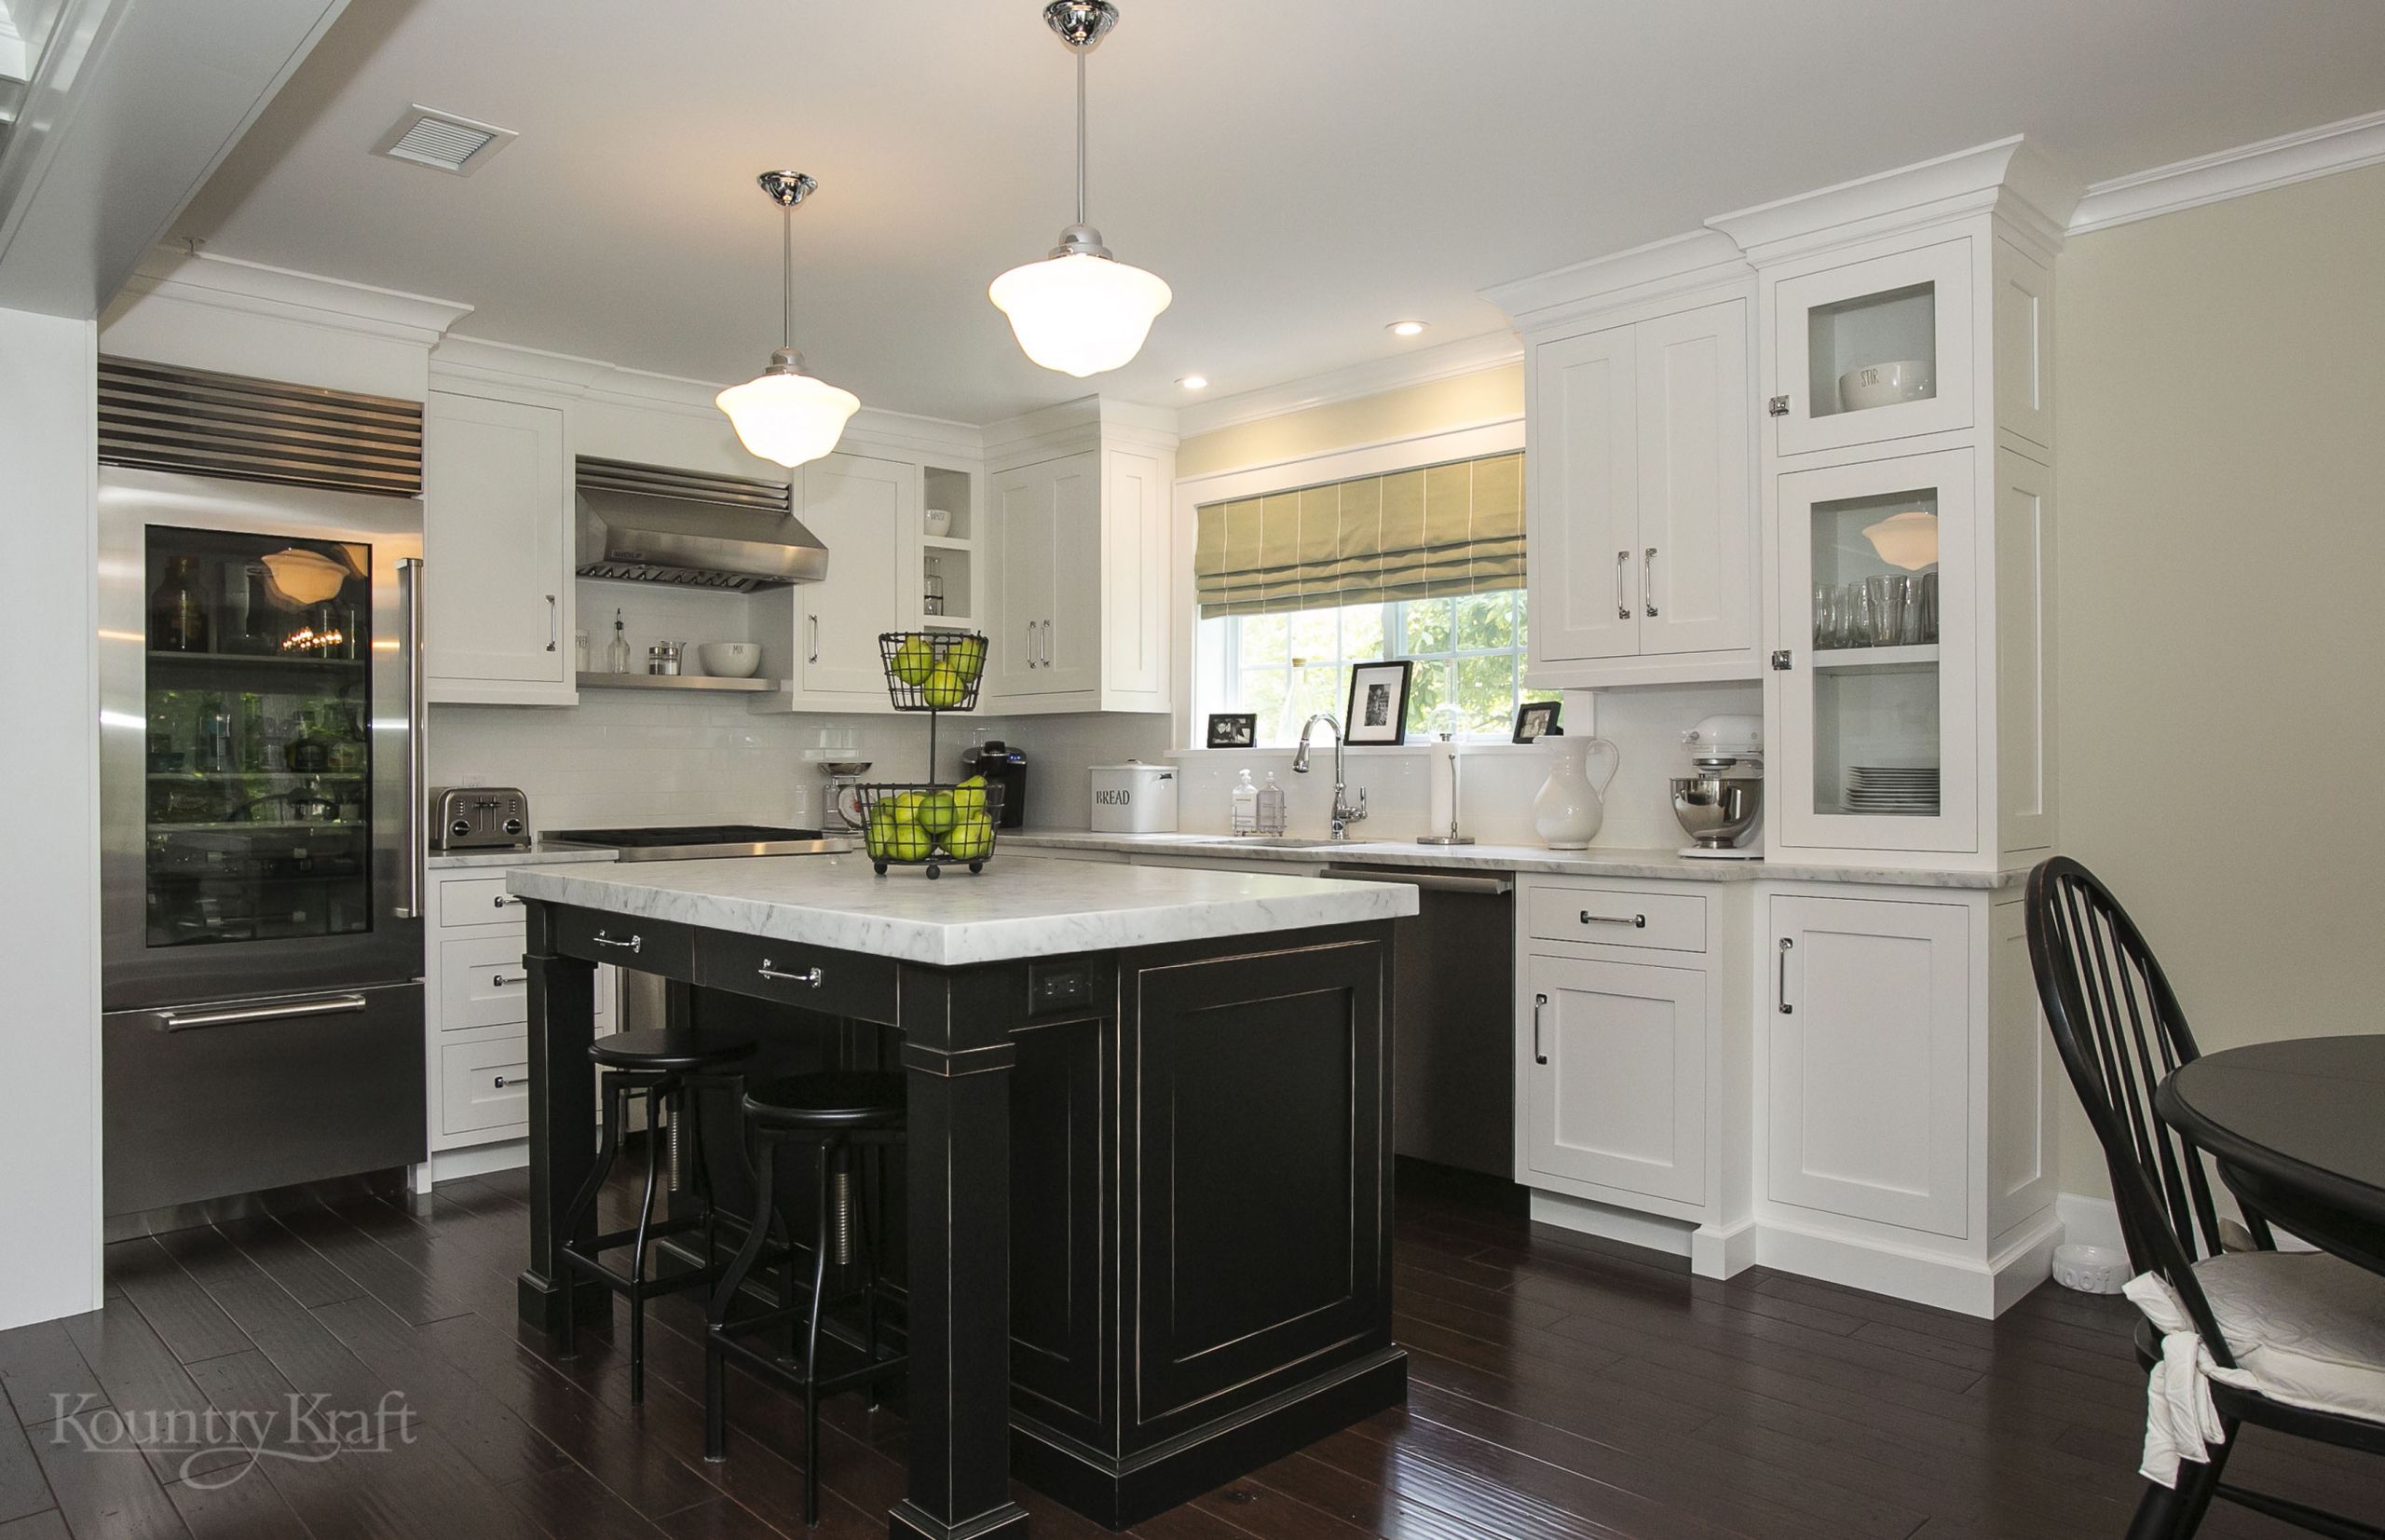 Kitchen Cabinets And Islands
 Black Kitchen Island and White Cabinets in Chatham NJ